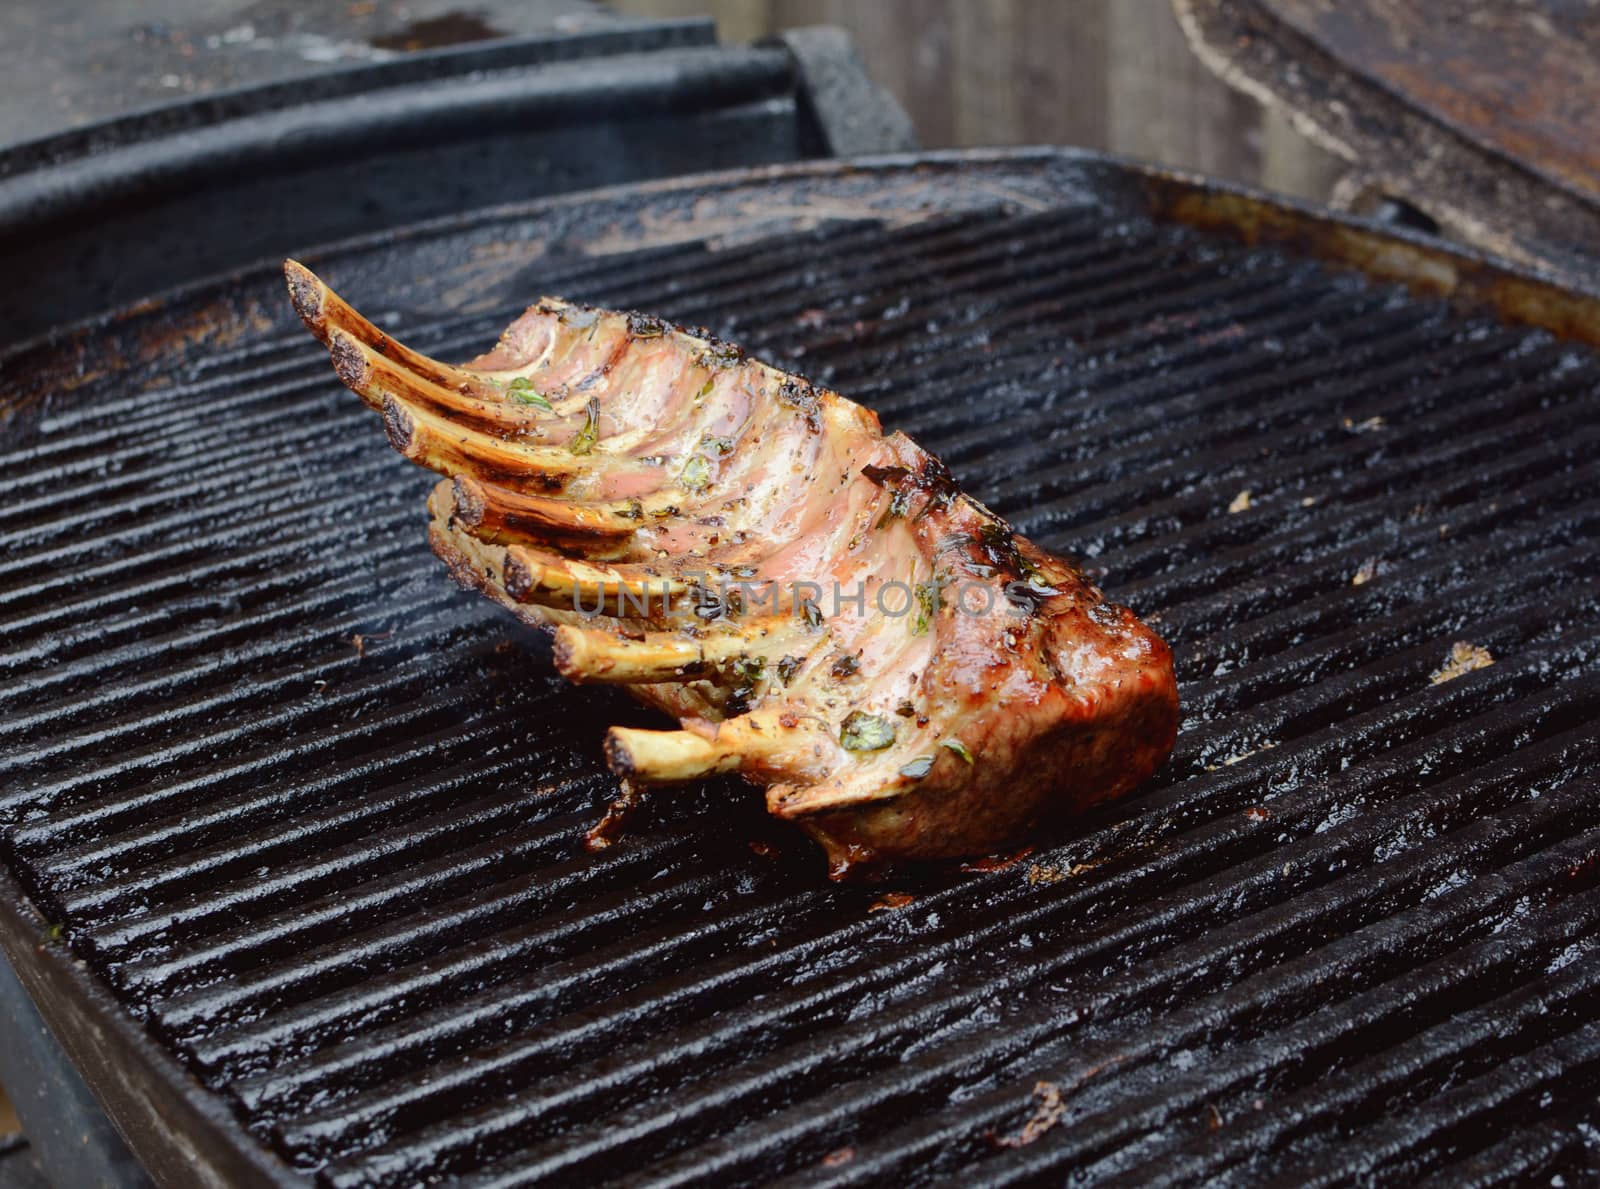 Grilled single rack of lamb on an outside grill; juicy meat still on the bone